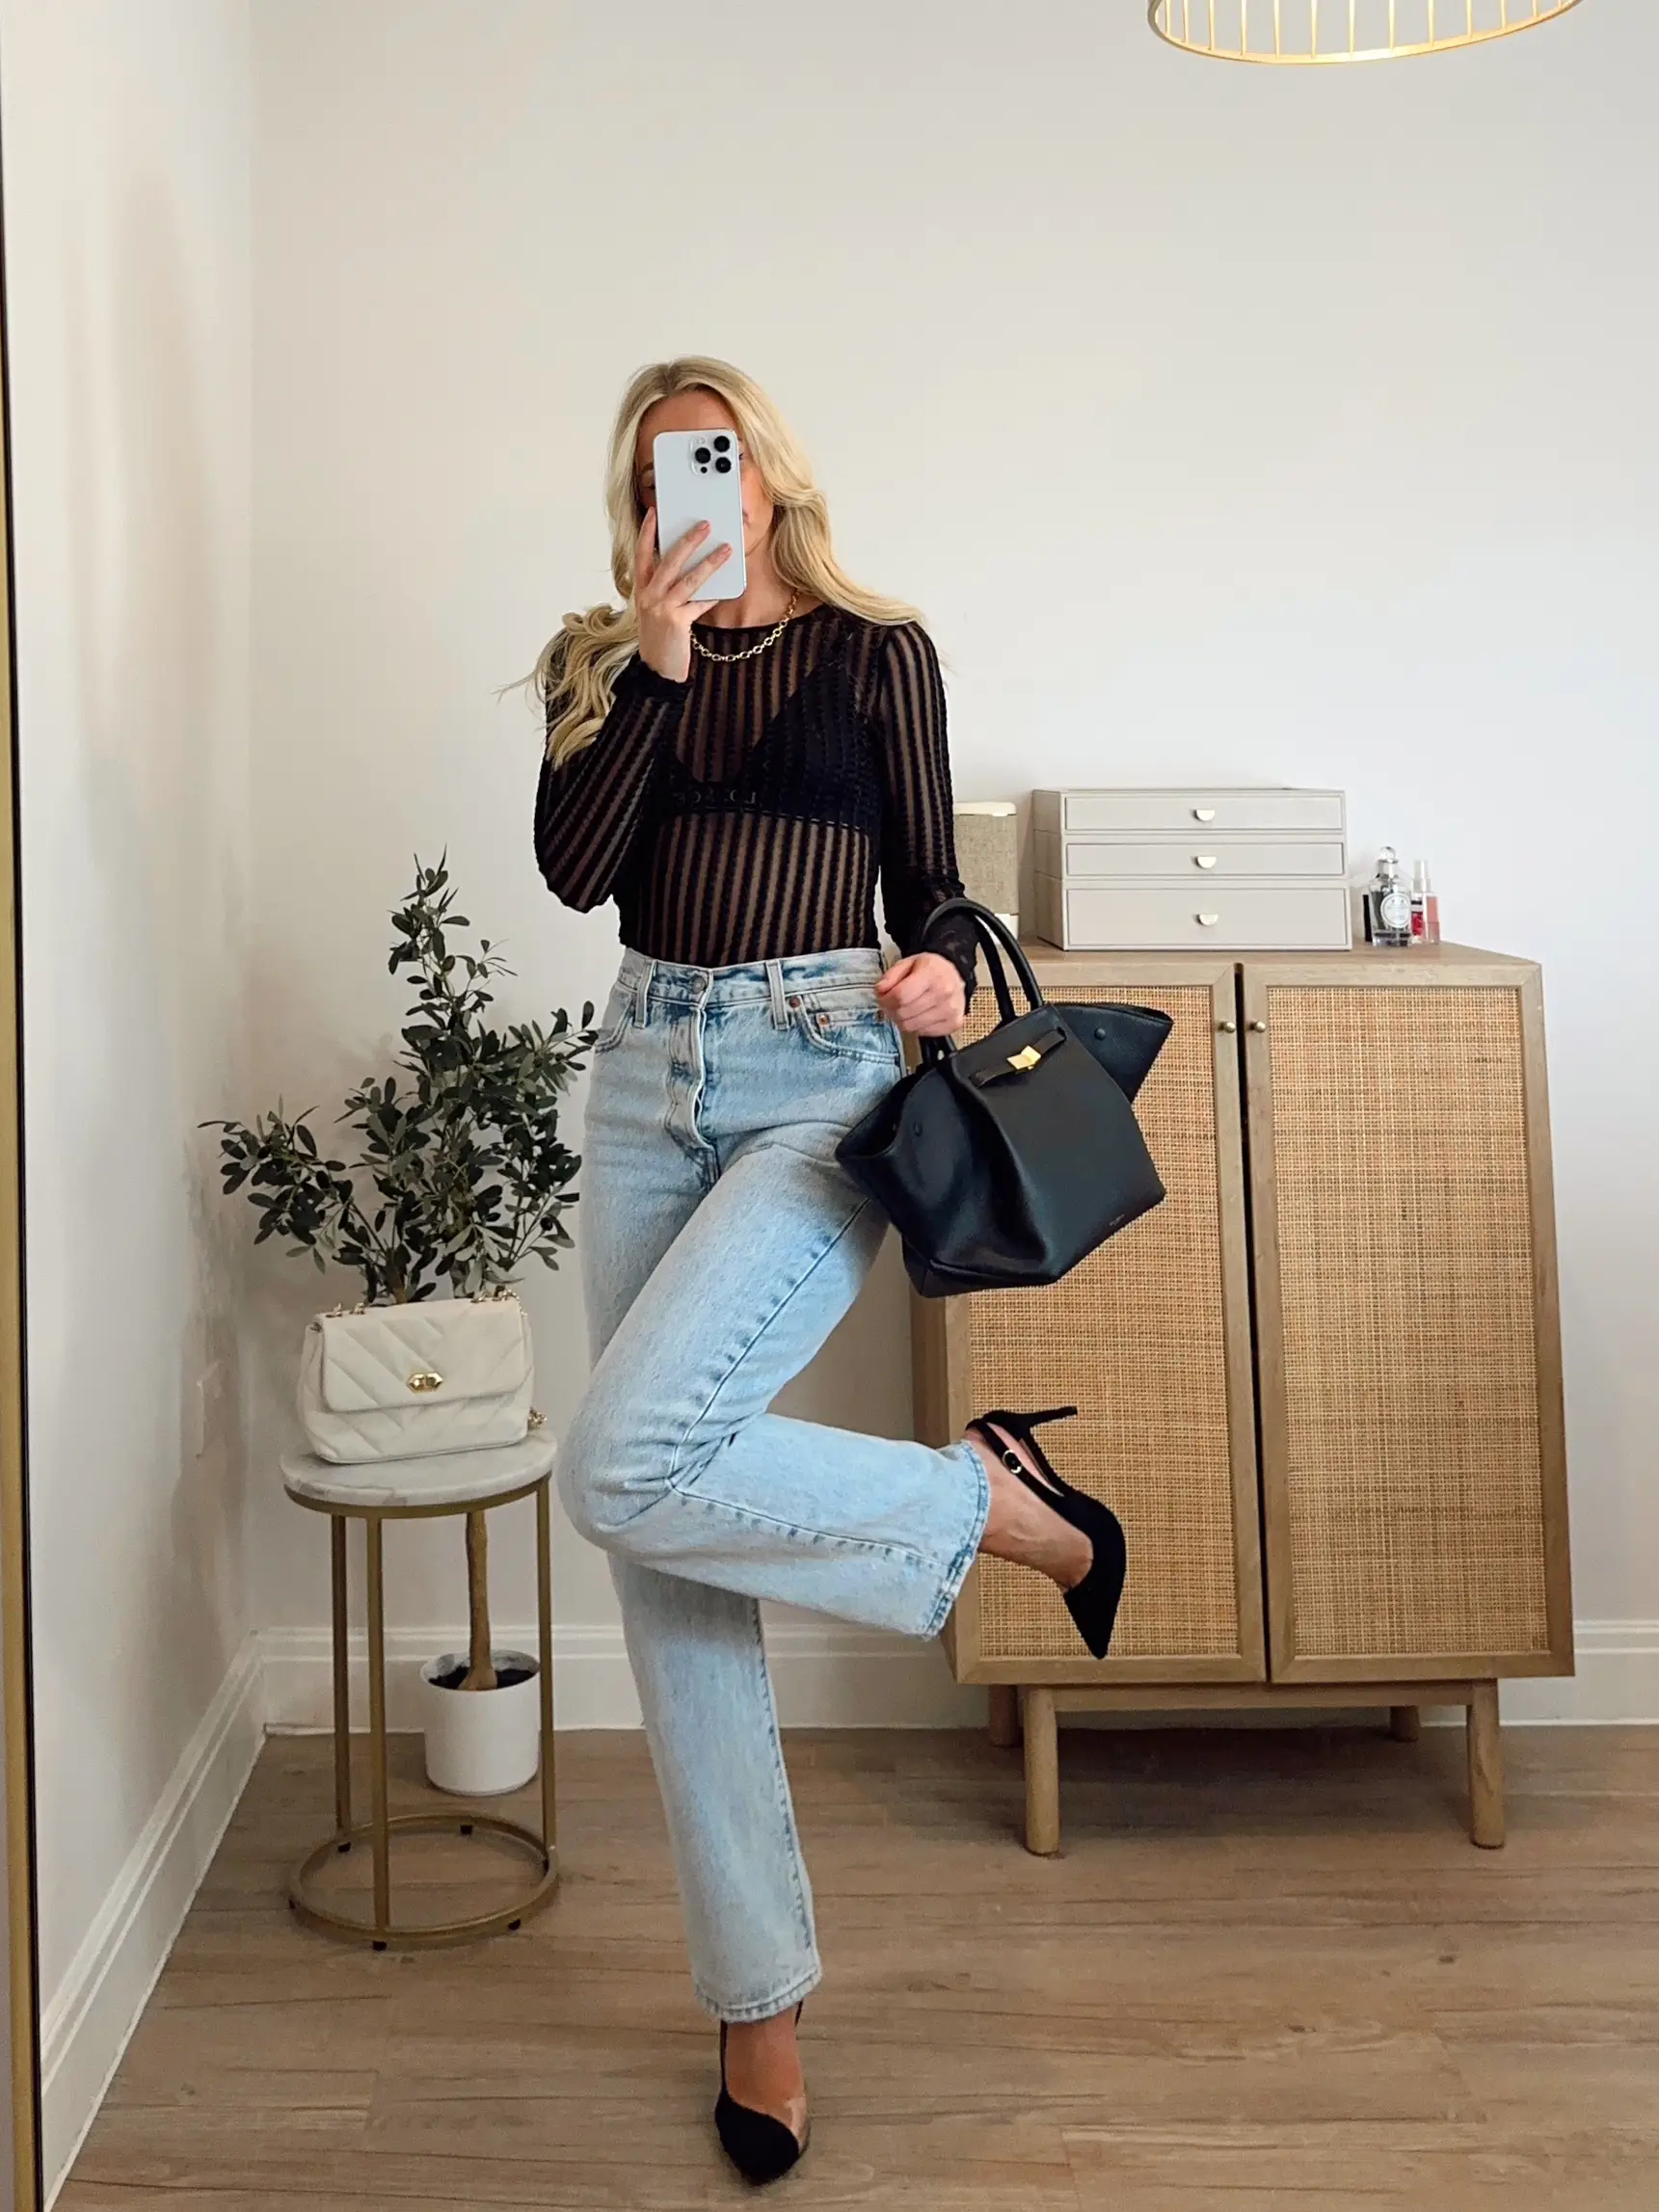 TOP 5 BEST JEANS TRY ON + REVIEW  Levi's, Zara, Mom Jeans, 501, Ribcage,  Wedgie 